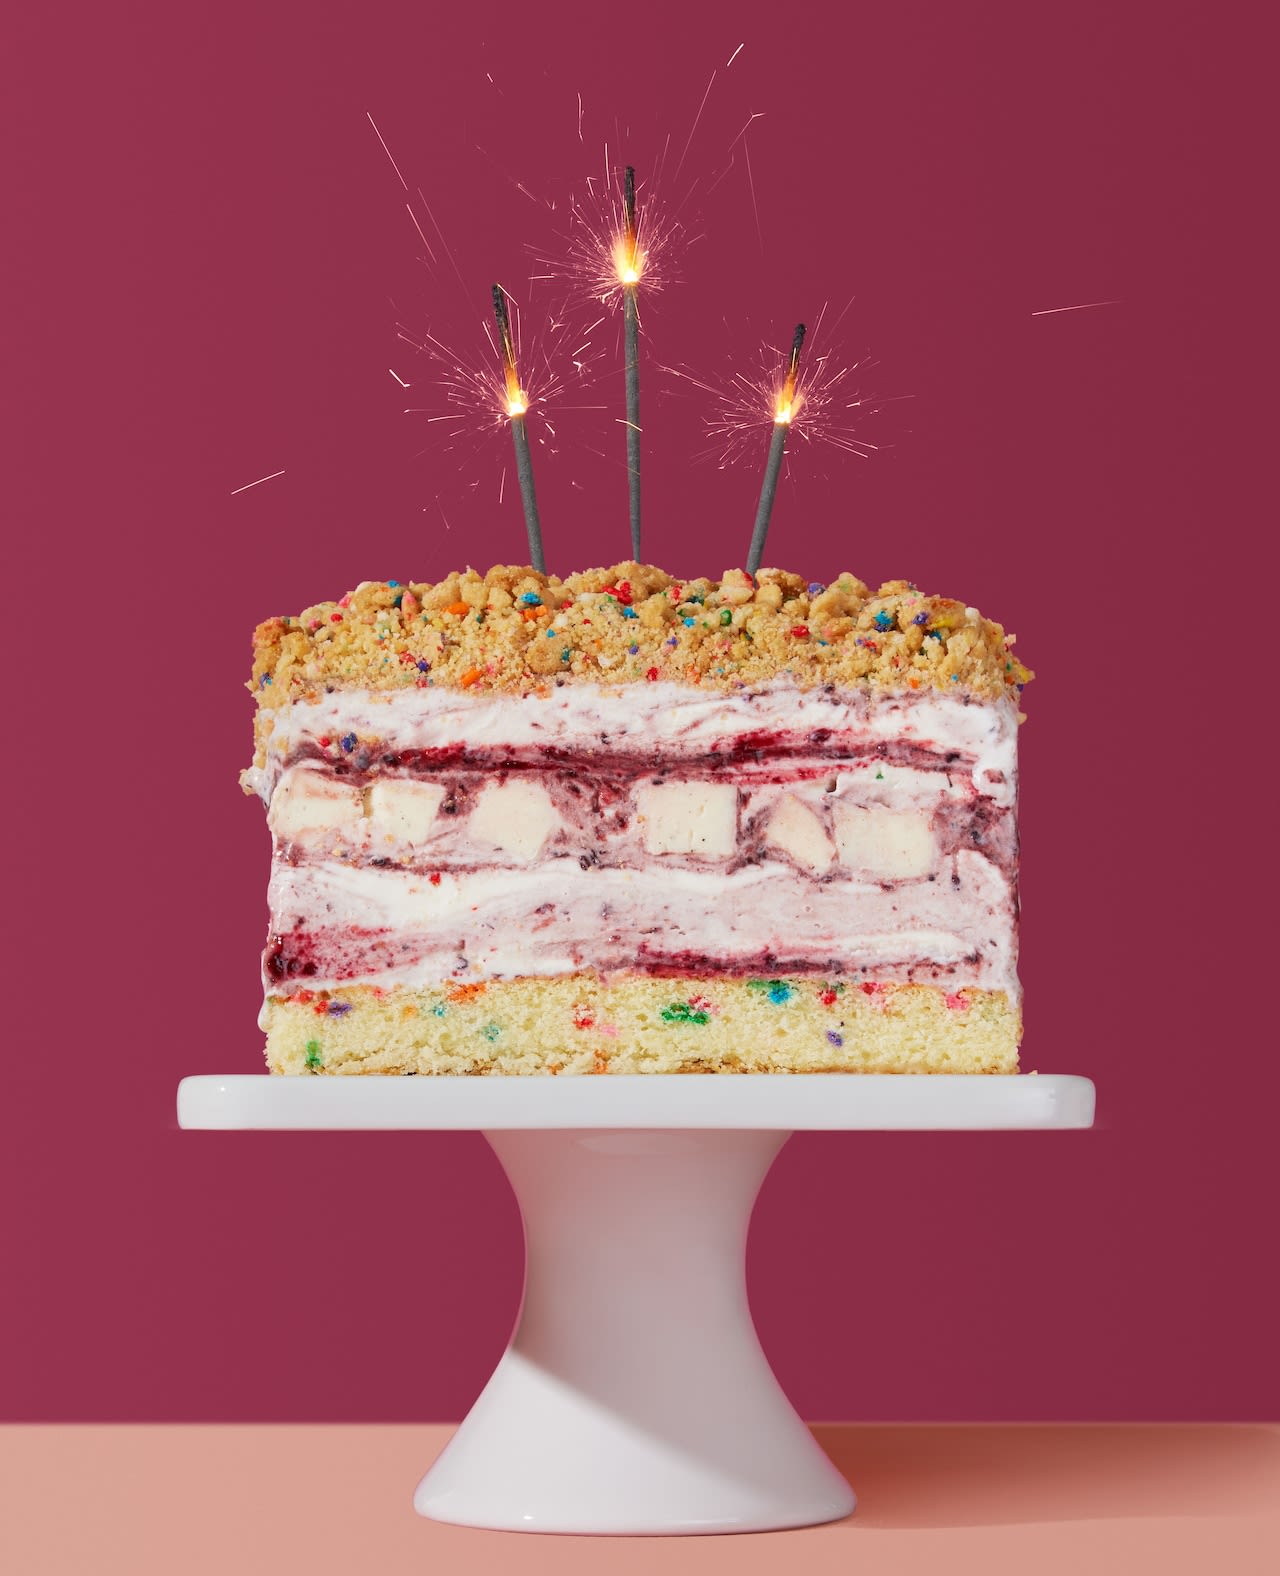 Salt & Straw will celebrate its birthday with a party, free slices of ice cream cake